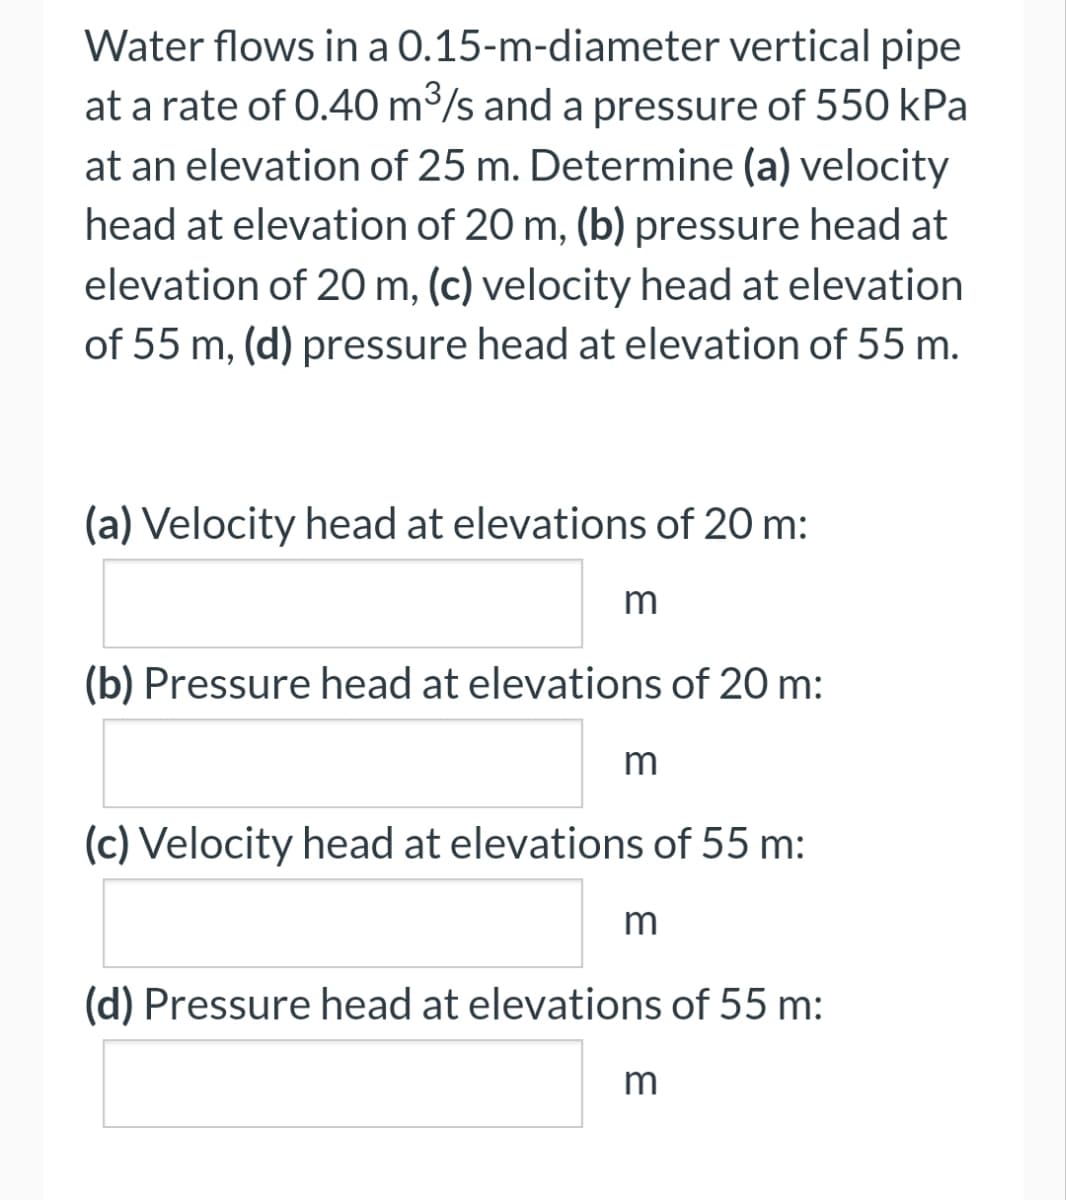 Water flows in a 0.15-m-diameter vertical pipe
at a rate of 0.40 m³/s and a pressure of 550 kPa
at an elevation of 25 m. Determine (a) velocity
head at elevation of 20 m, (b) pressure head at
elevation of 20 m, (c) velocity head at elevation
of 55 m, (d) pressure head at elevation of 55 m.
(a) Velocity head at elevations of 20 m:
m
(b) Pressure head at elevations of 20 m:
m
(c) Velocity head at elevations of 55 m:
m
(d) Pressure head at elevations of 55 m:
m